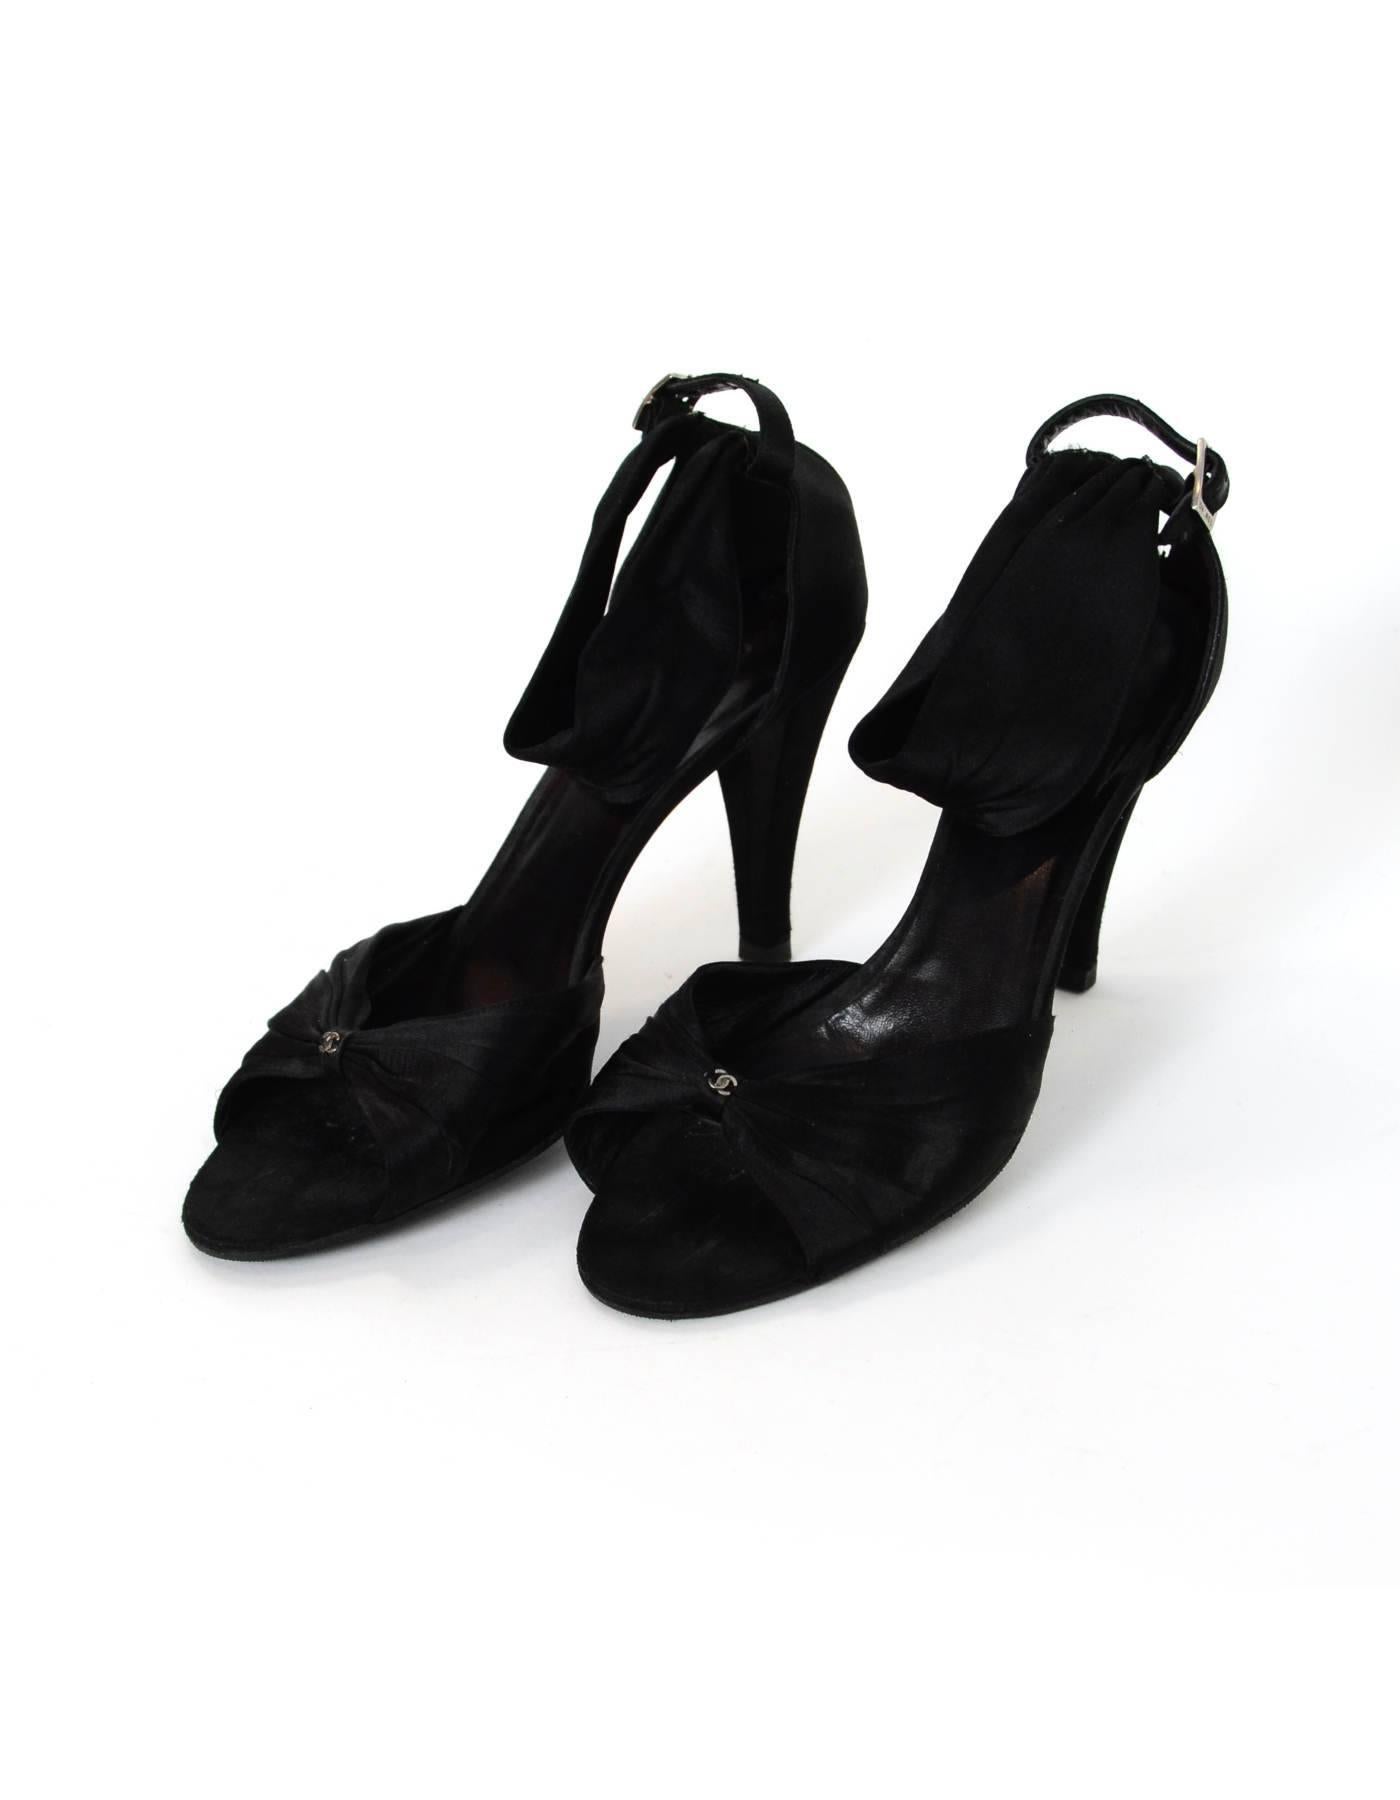 Chanel Black Satin Sandals Sz 41

Made In: Italy
Color: Black
Materials: Satin
Closure/Opening: Buckle closure at back of ankle
Sole Stamp: CC Made in Italy 41
Overall Condition: Very good pre-owned condition with the exception of being re-soled,